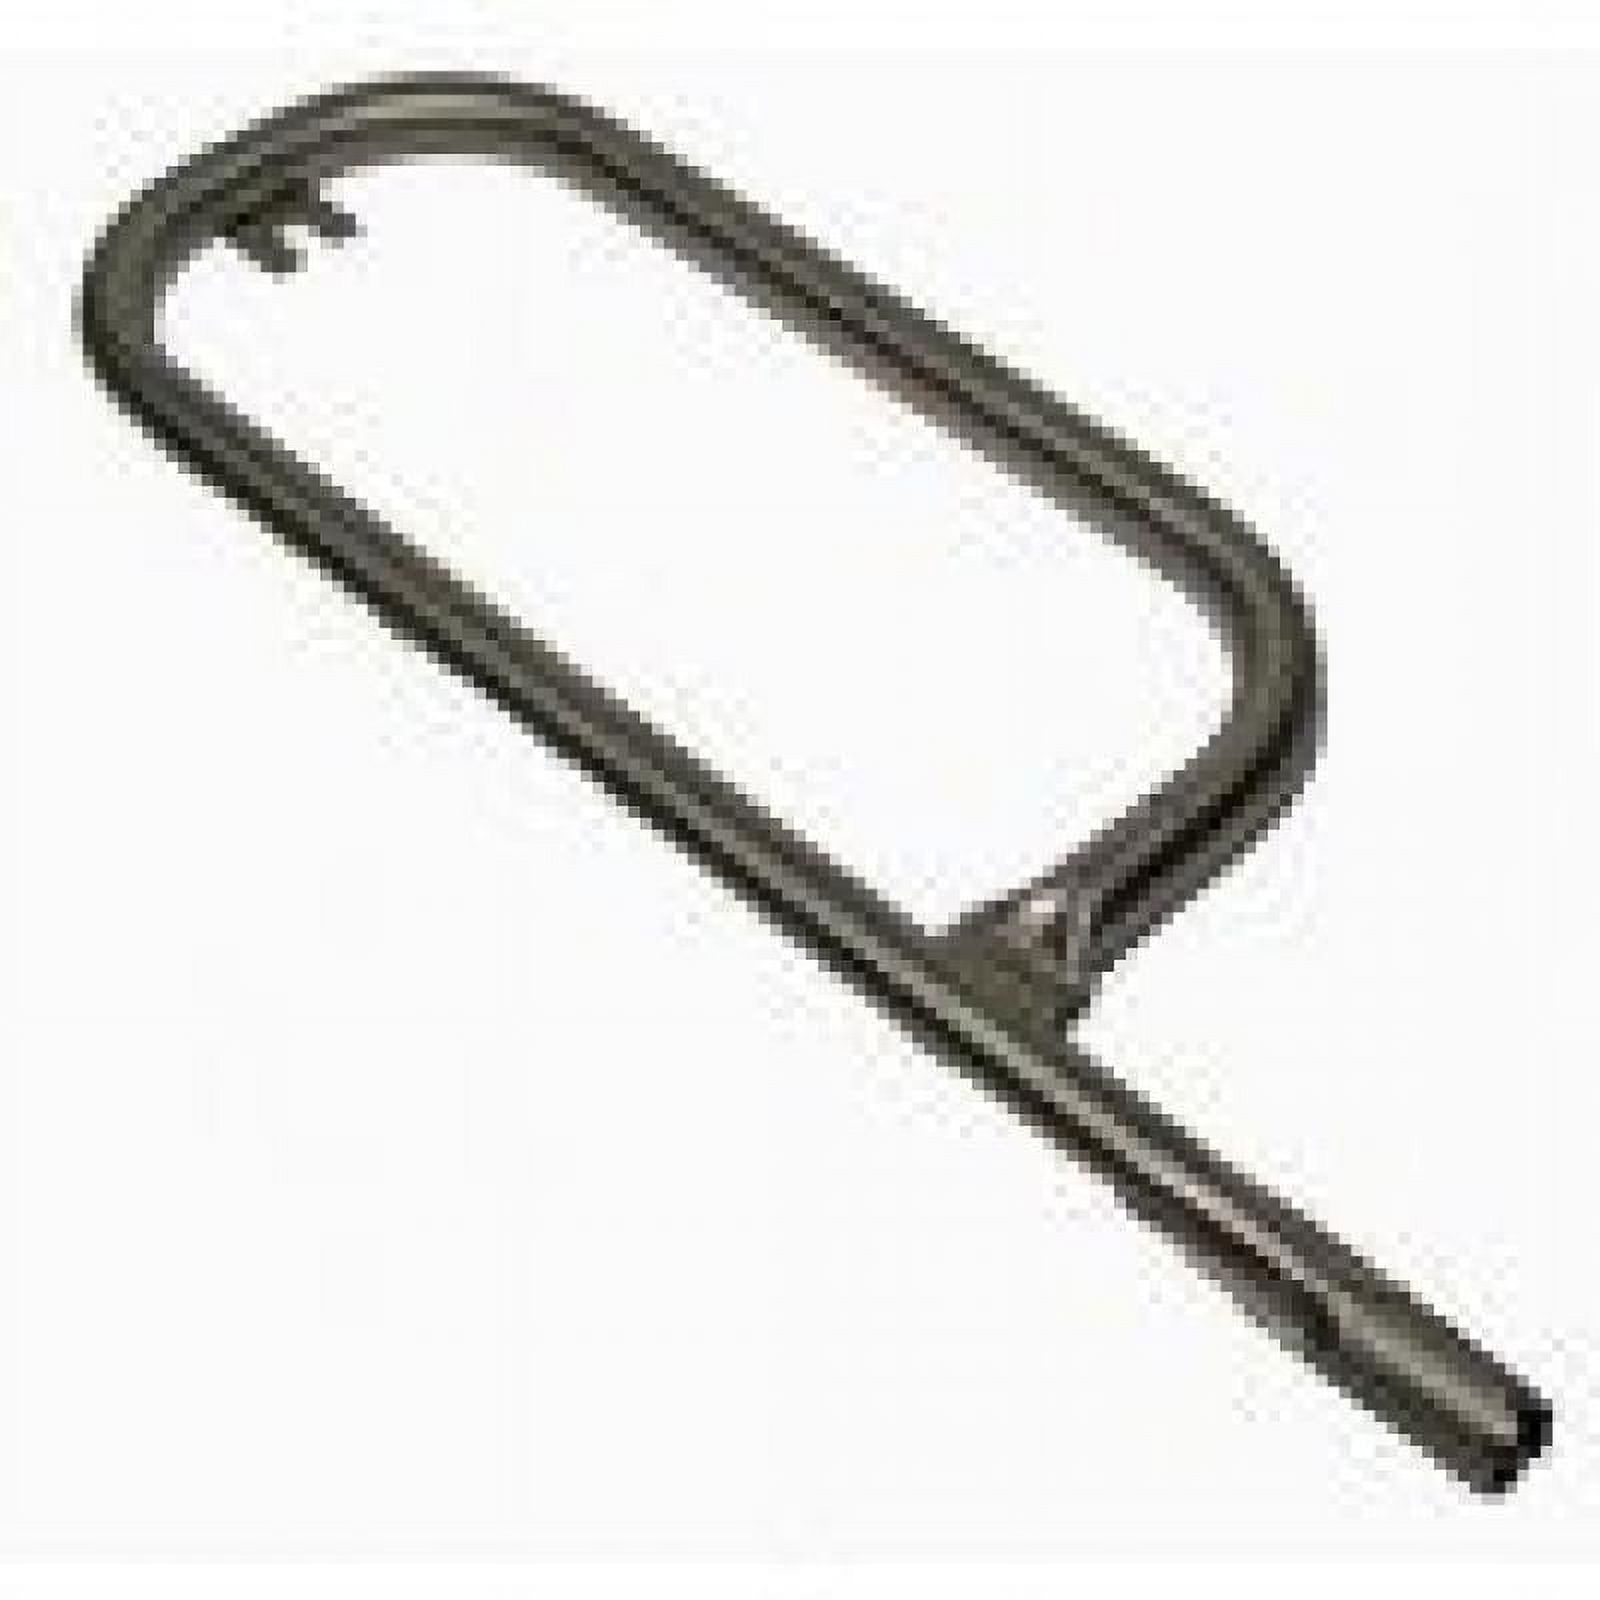 Weber Gas Grill Tube Burner Only Fits Q100, Q120, Q1200 Model Numbers - image 1 of 9